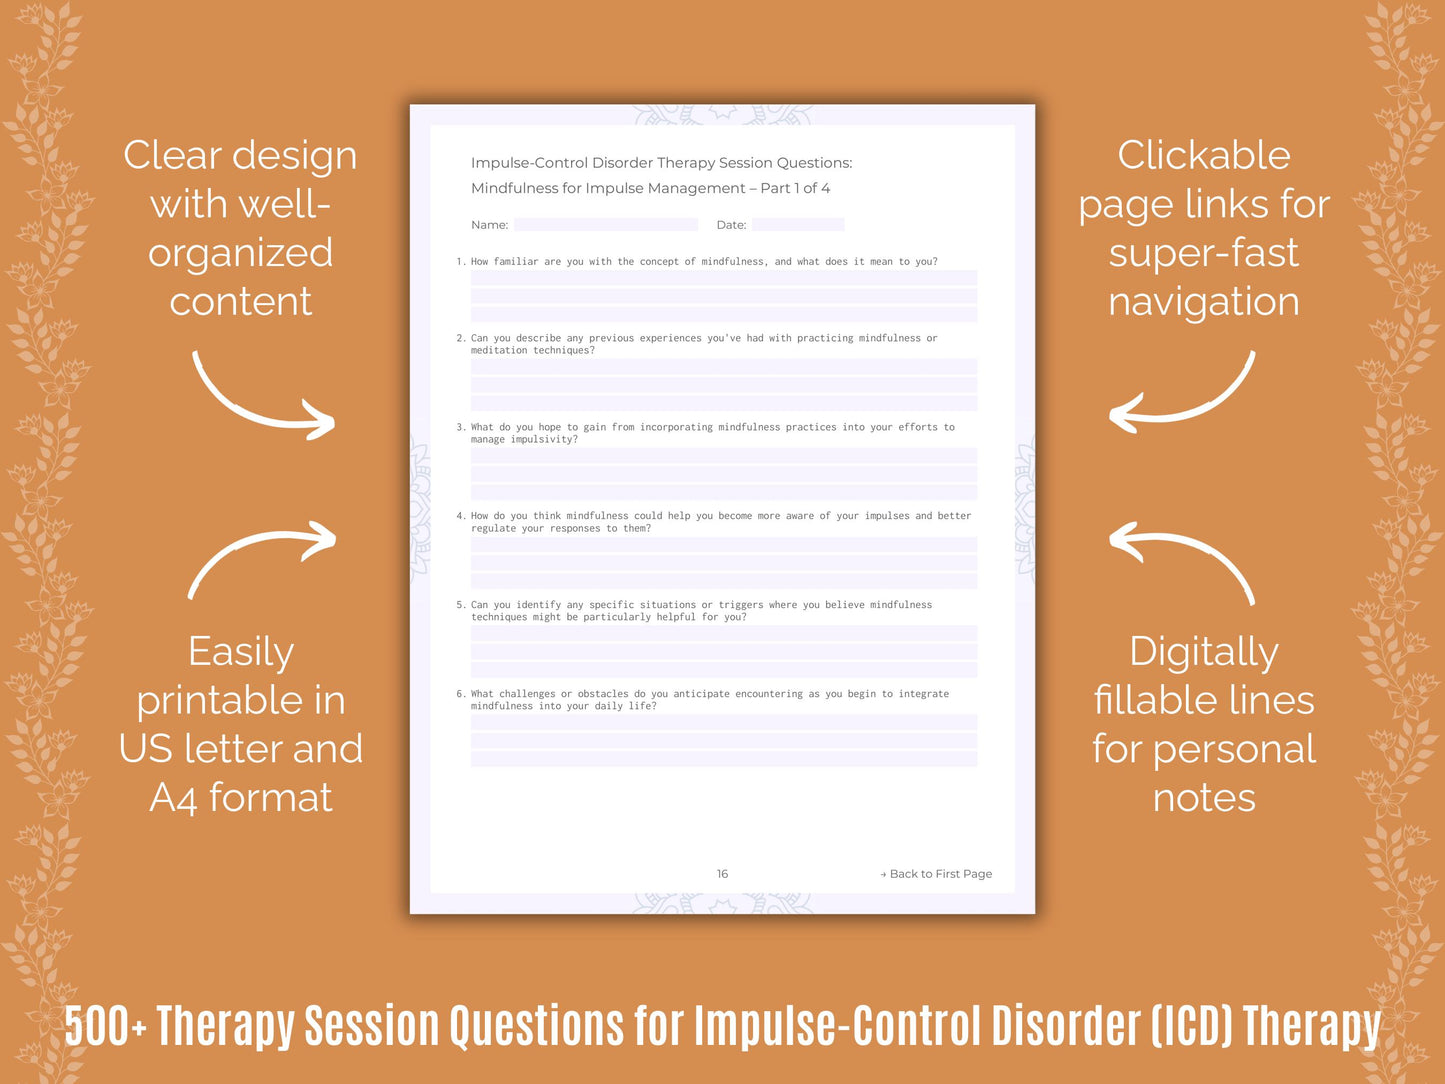 Impulse-Control Disorder (ICD) Therapy Session Questions Resource